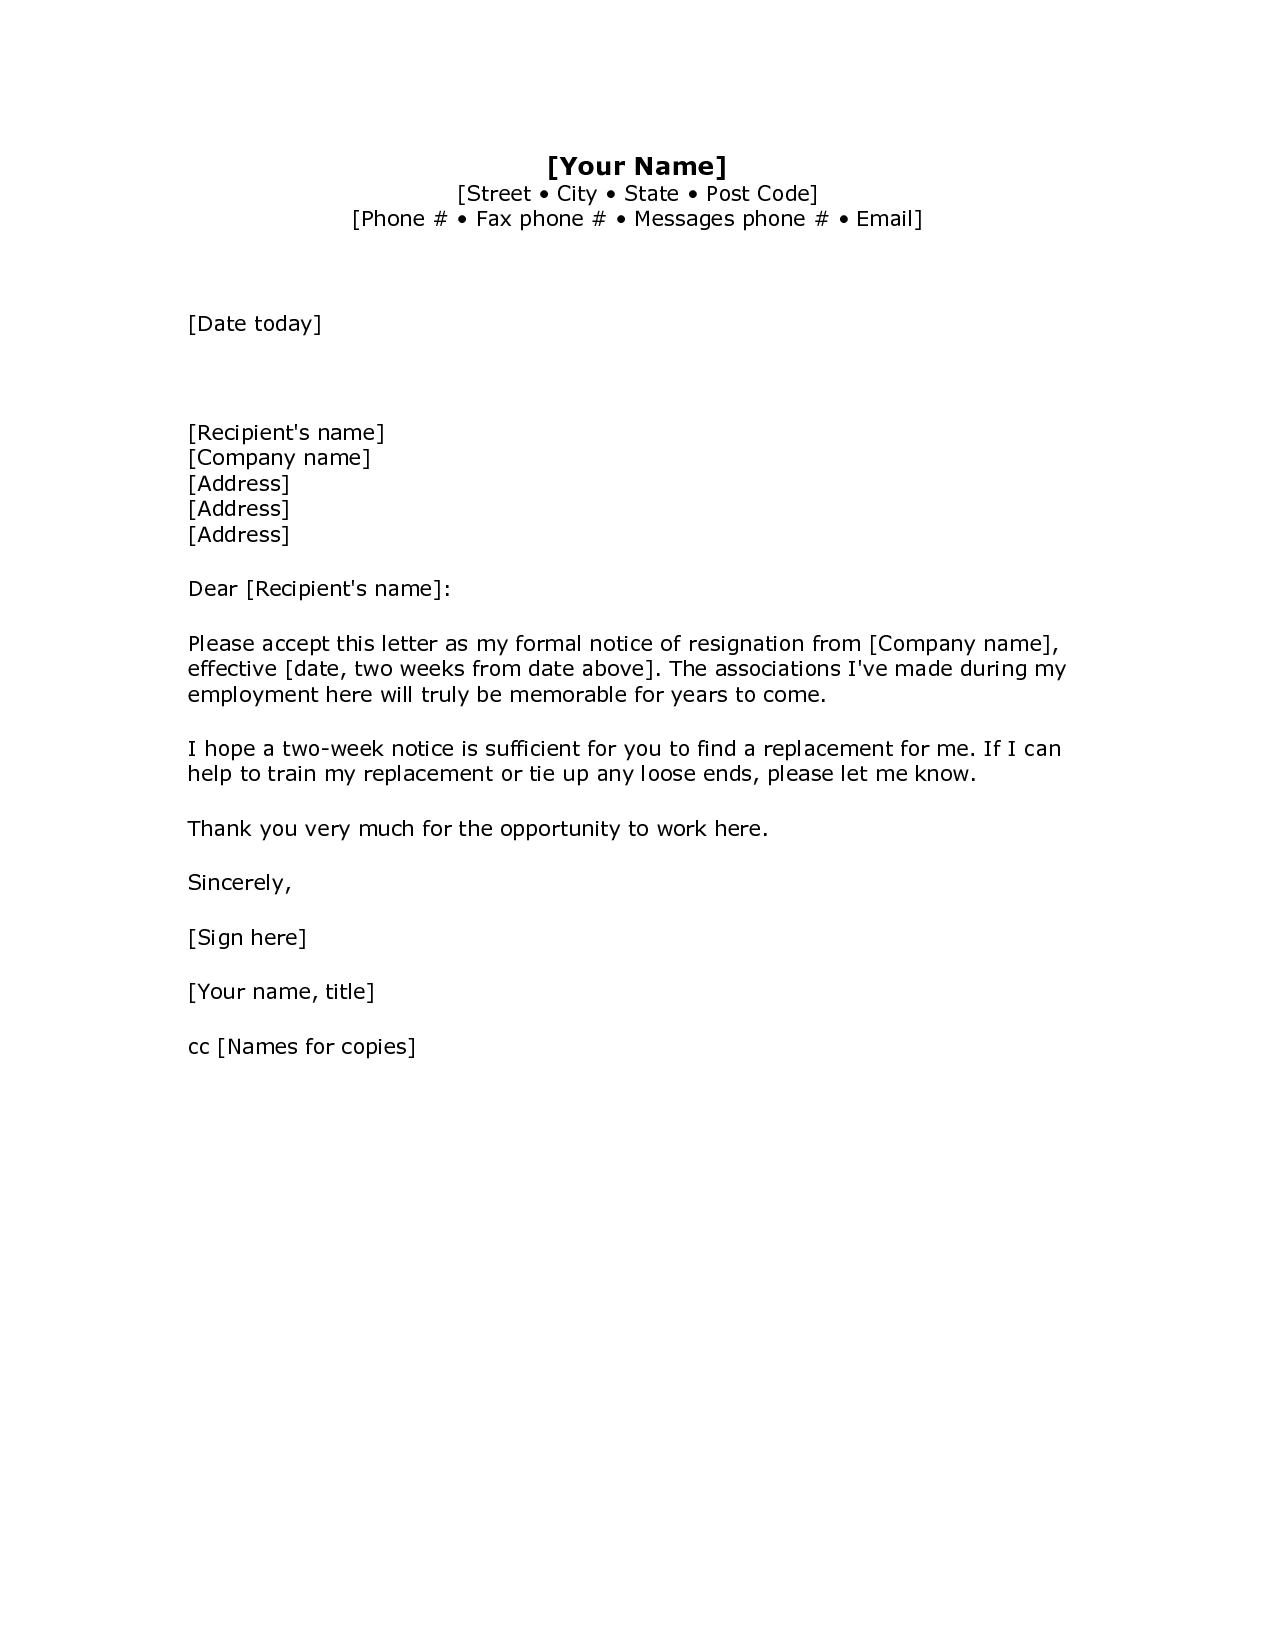 Appointment Reminder Letter Template - 2 Weeks Notice Letter Resignation Letter Week Notice Words Hdwriting